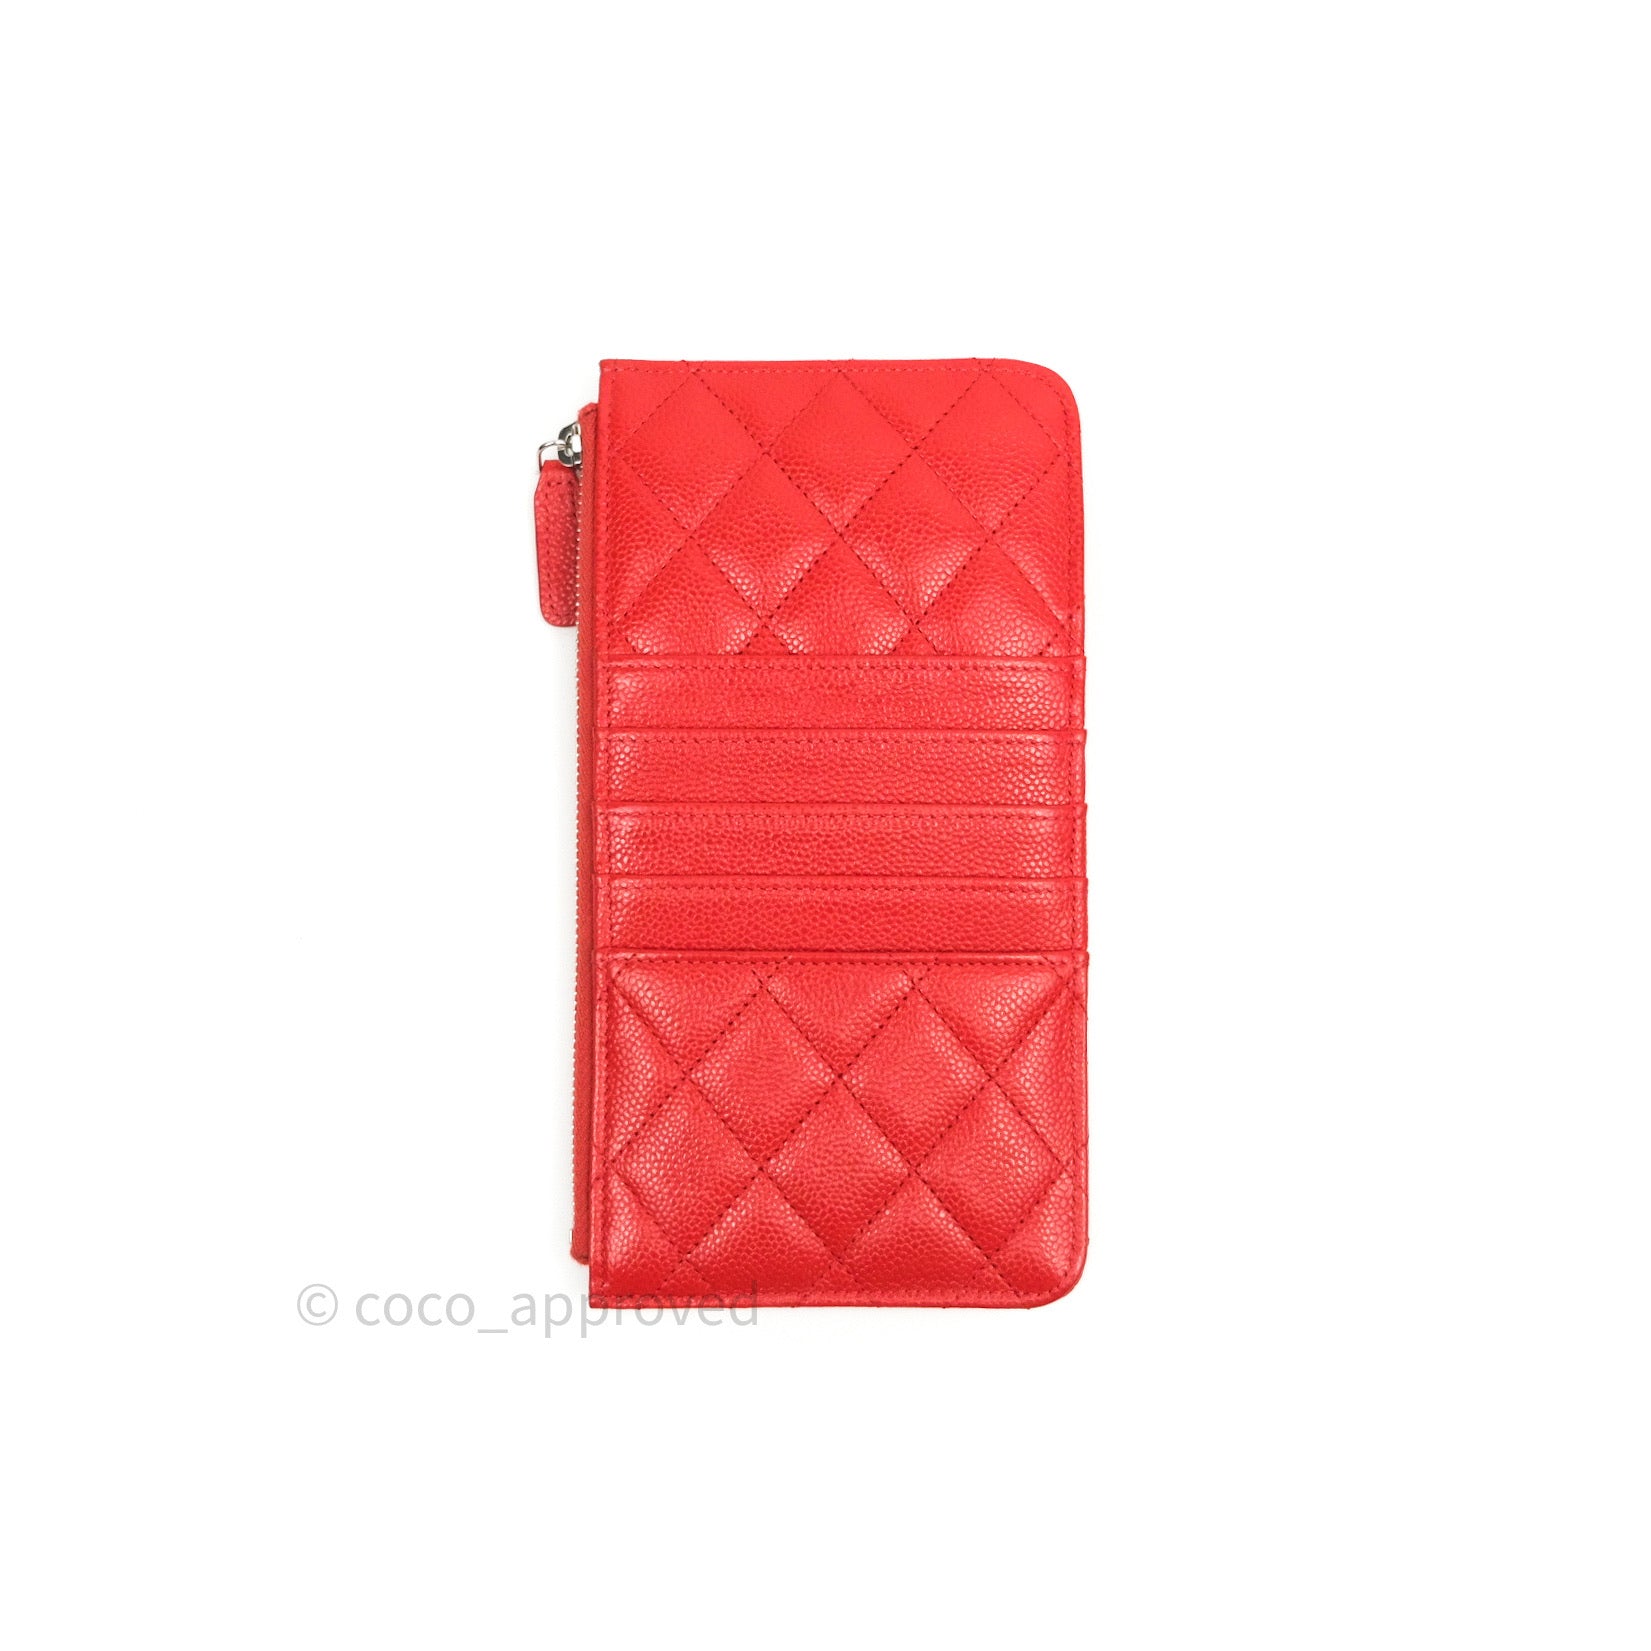 Chanel Red Caviar Phone Holder Long Zip Wallet